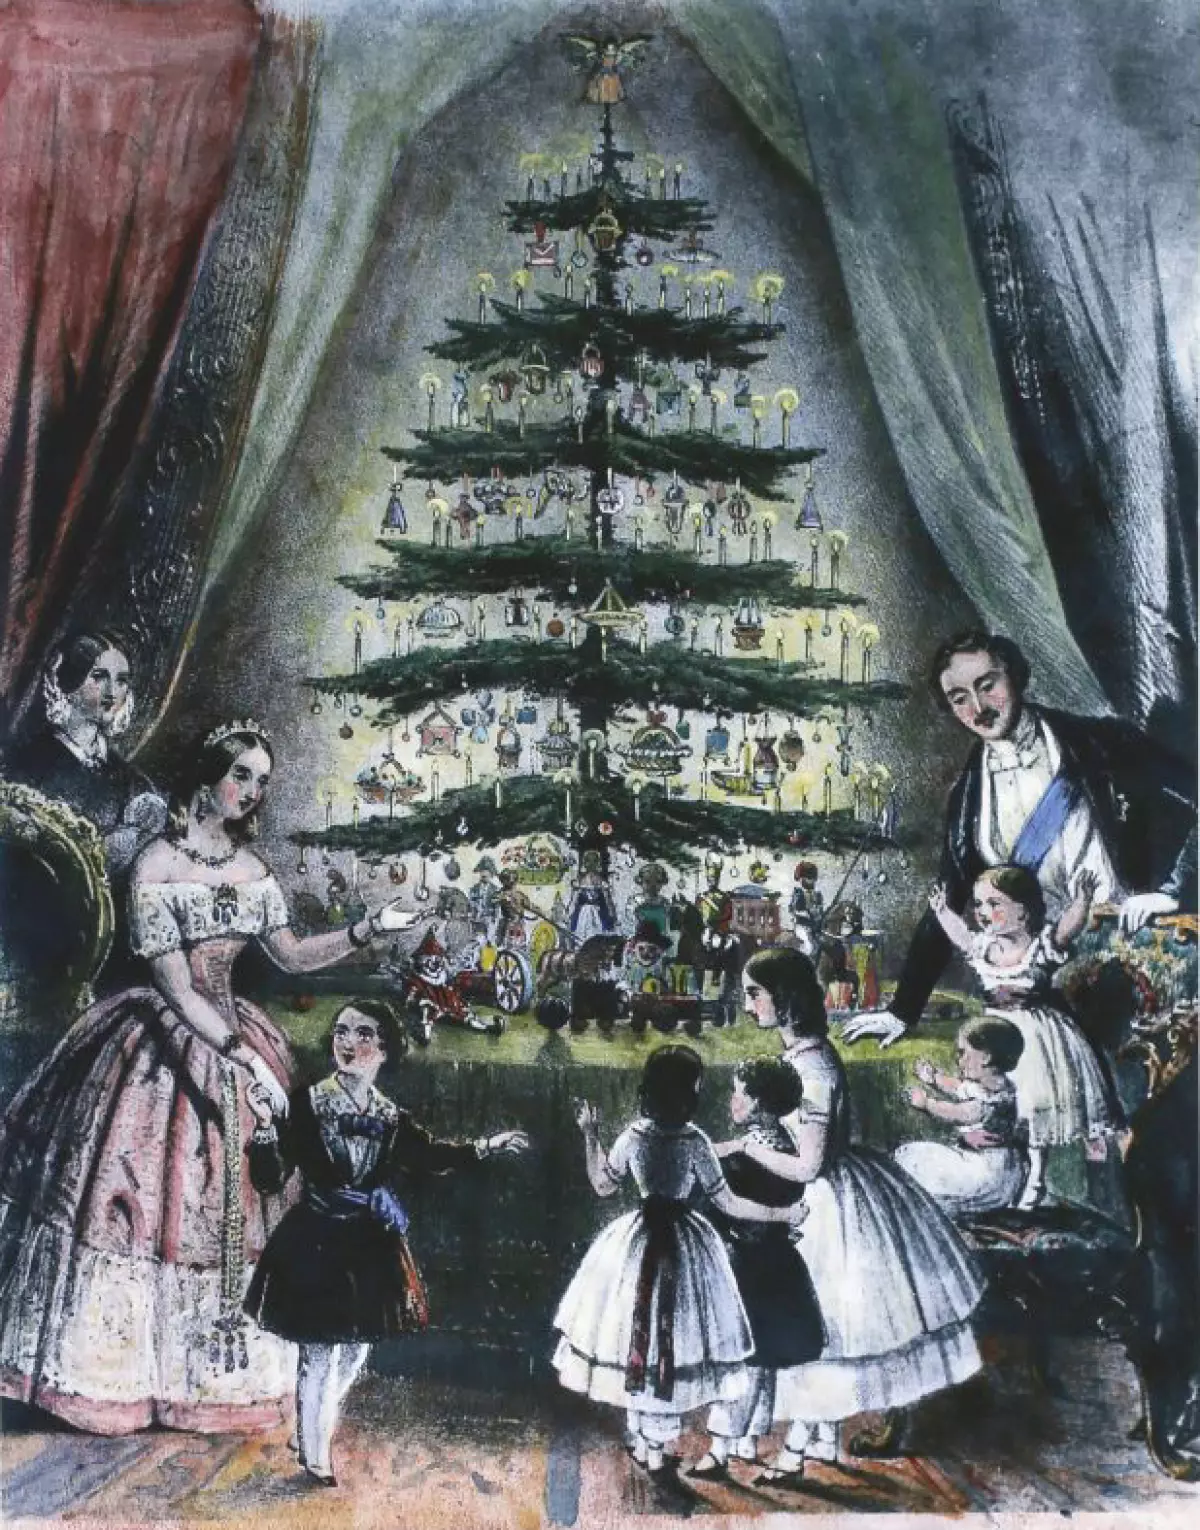 The Royal Christmas tree is admired by Queen Victoria, Prince Albert, and their children.